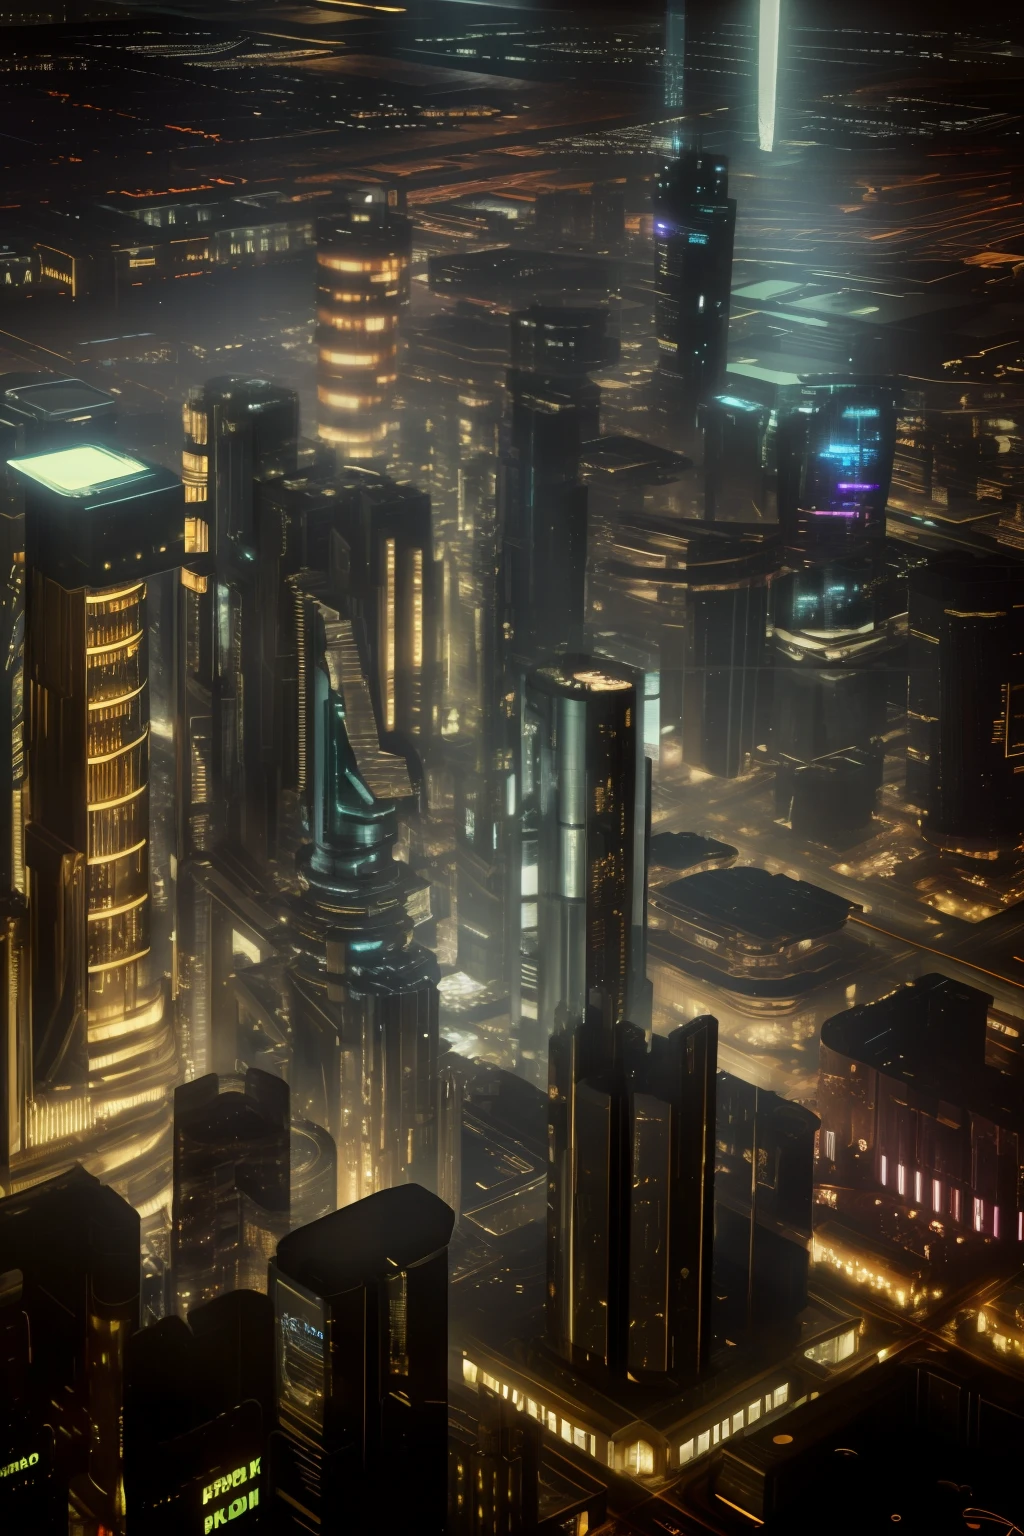 High resolution, masterpiece, high quality, rich detail, 8k wallpaper, cyberpunk city, steampunk style, night with many buildings scattered, front shot, bottom-up shot.